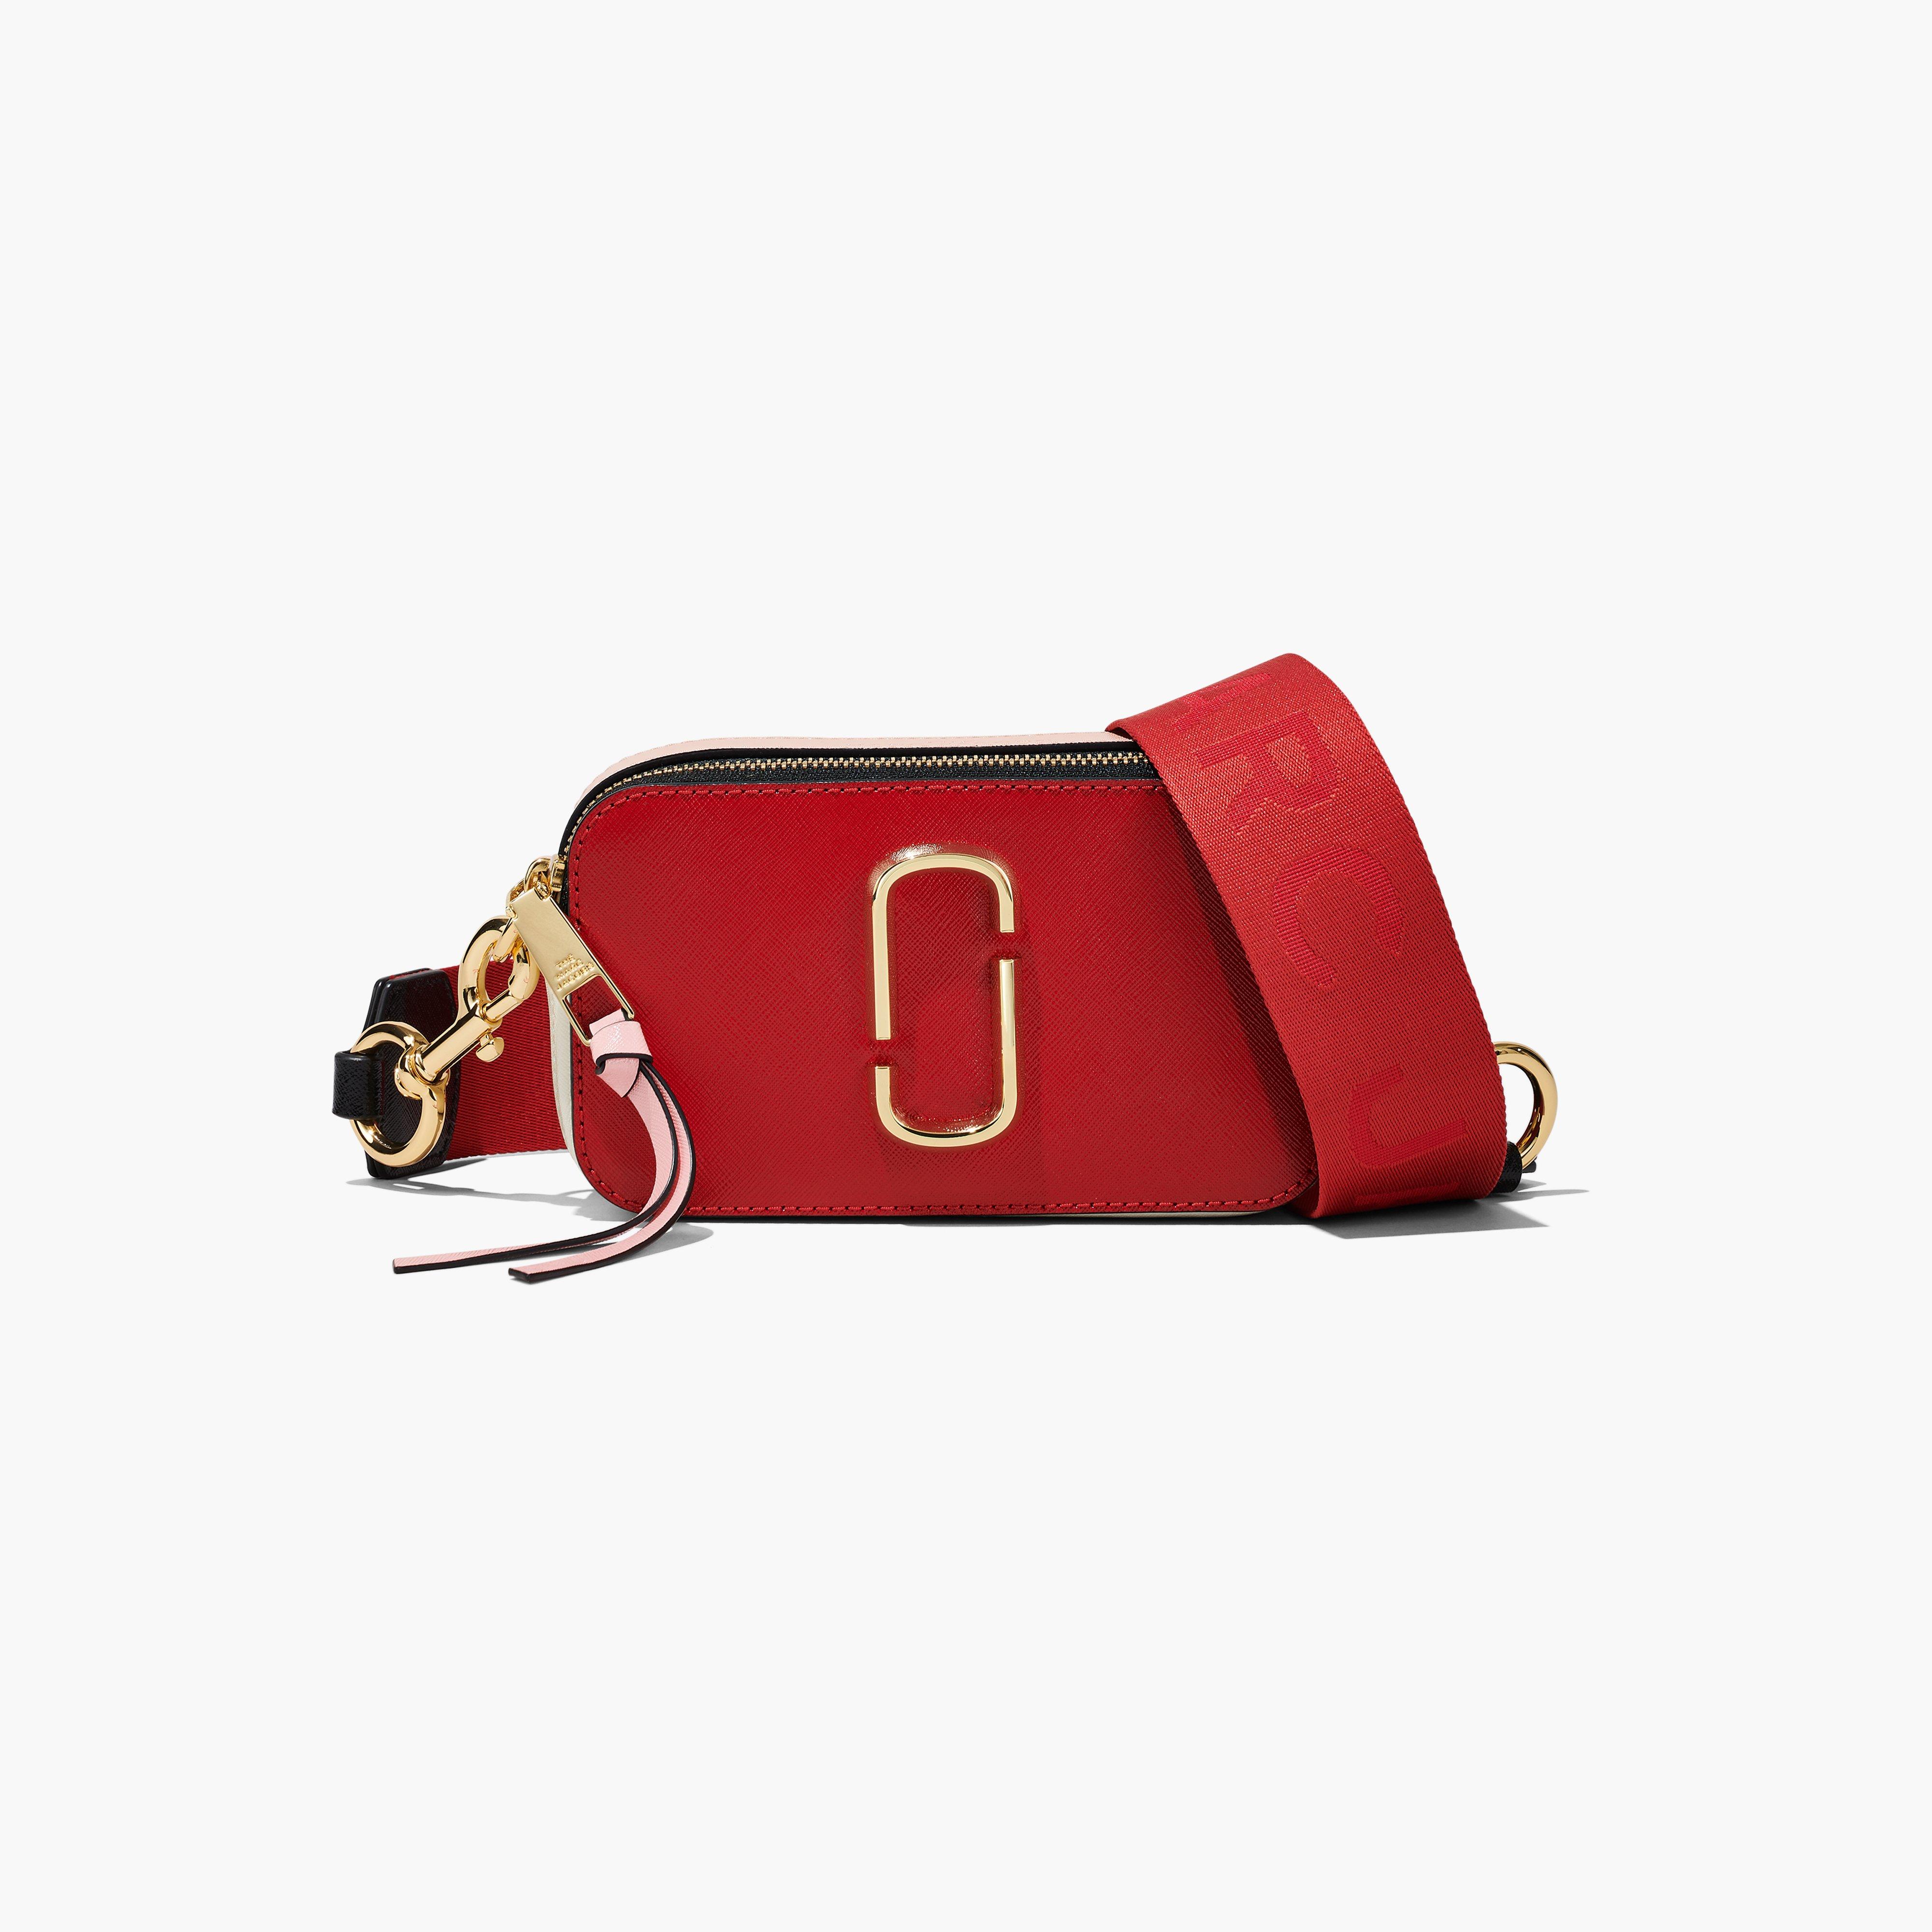 Marc by Marc jacobs The Snapshot,TRUE RED MULTI